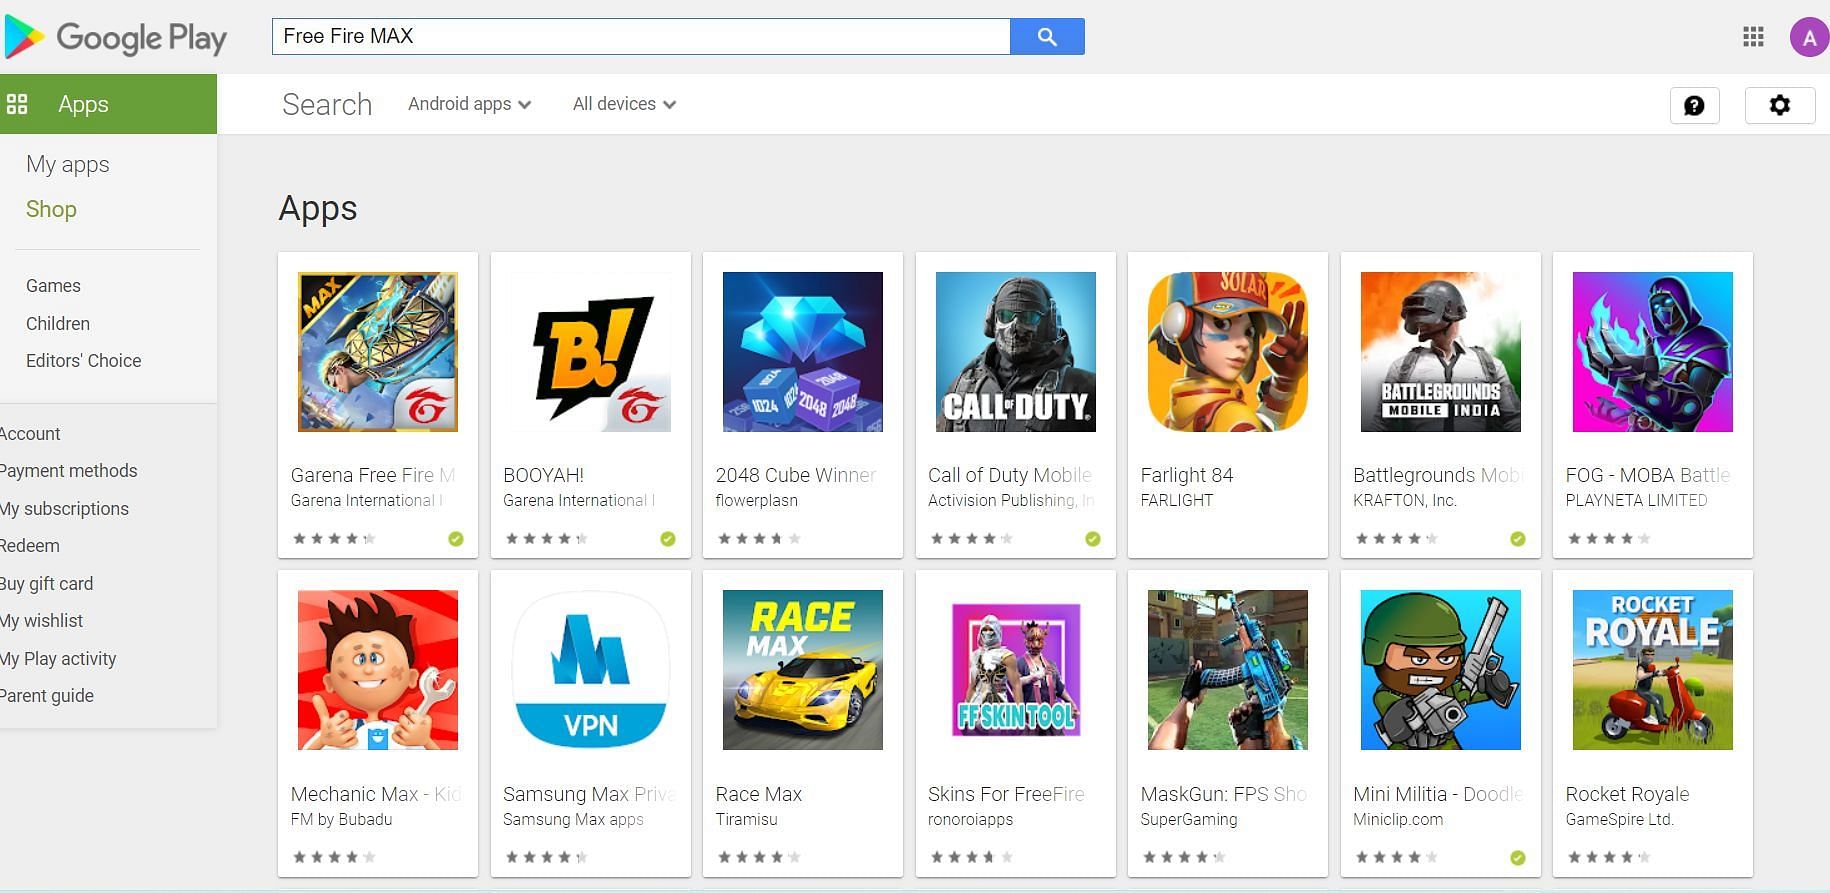 FF MAX is still accessible via the Play Store (Image via Google Play)